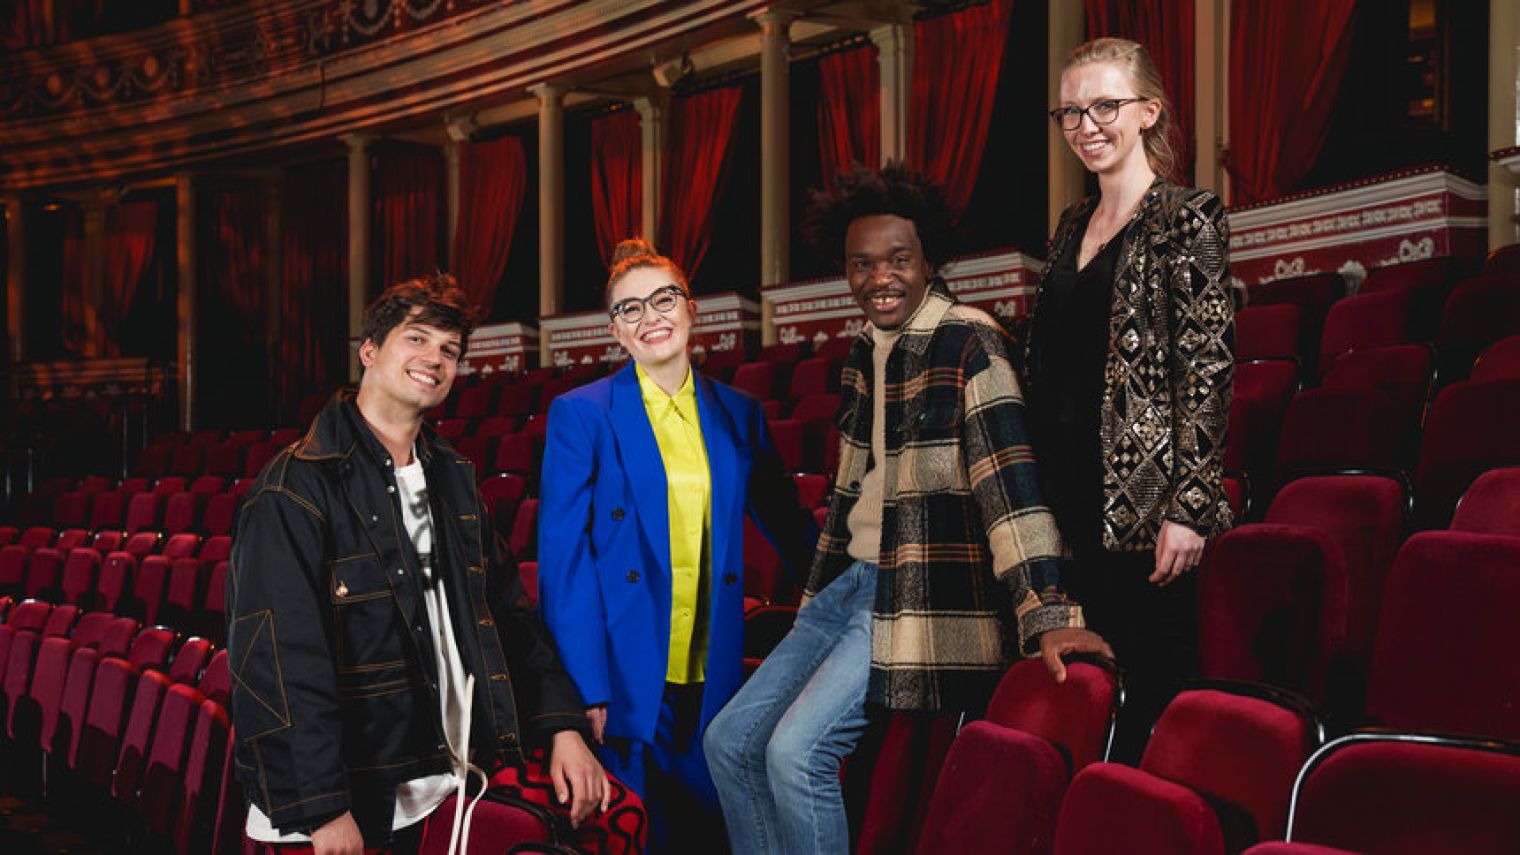 LionHeart has been chosen as one of the Royal Albert Hall's Associate Artists, a year on from their 150th birthday celebrations